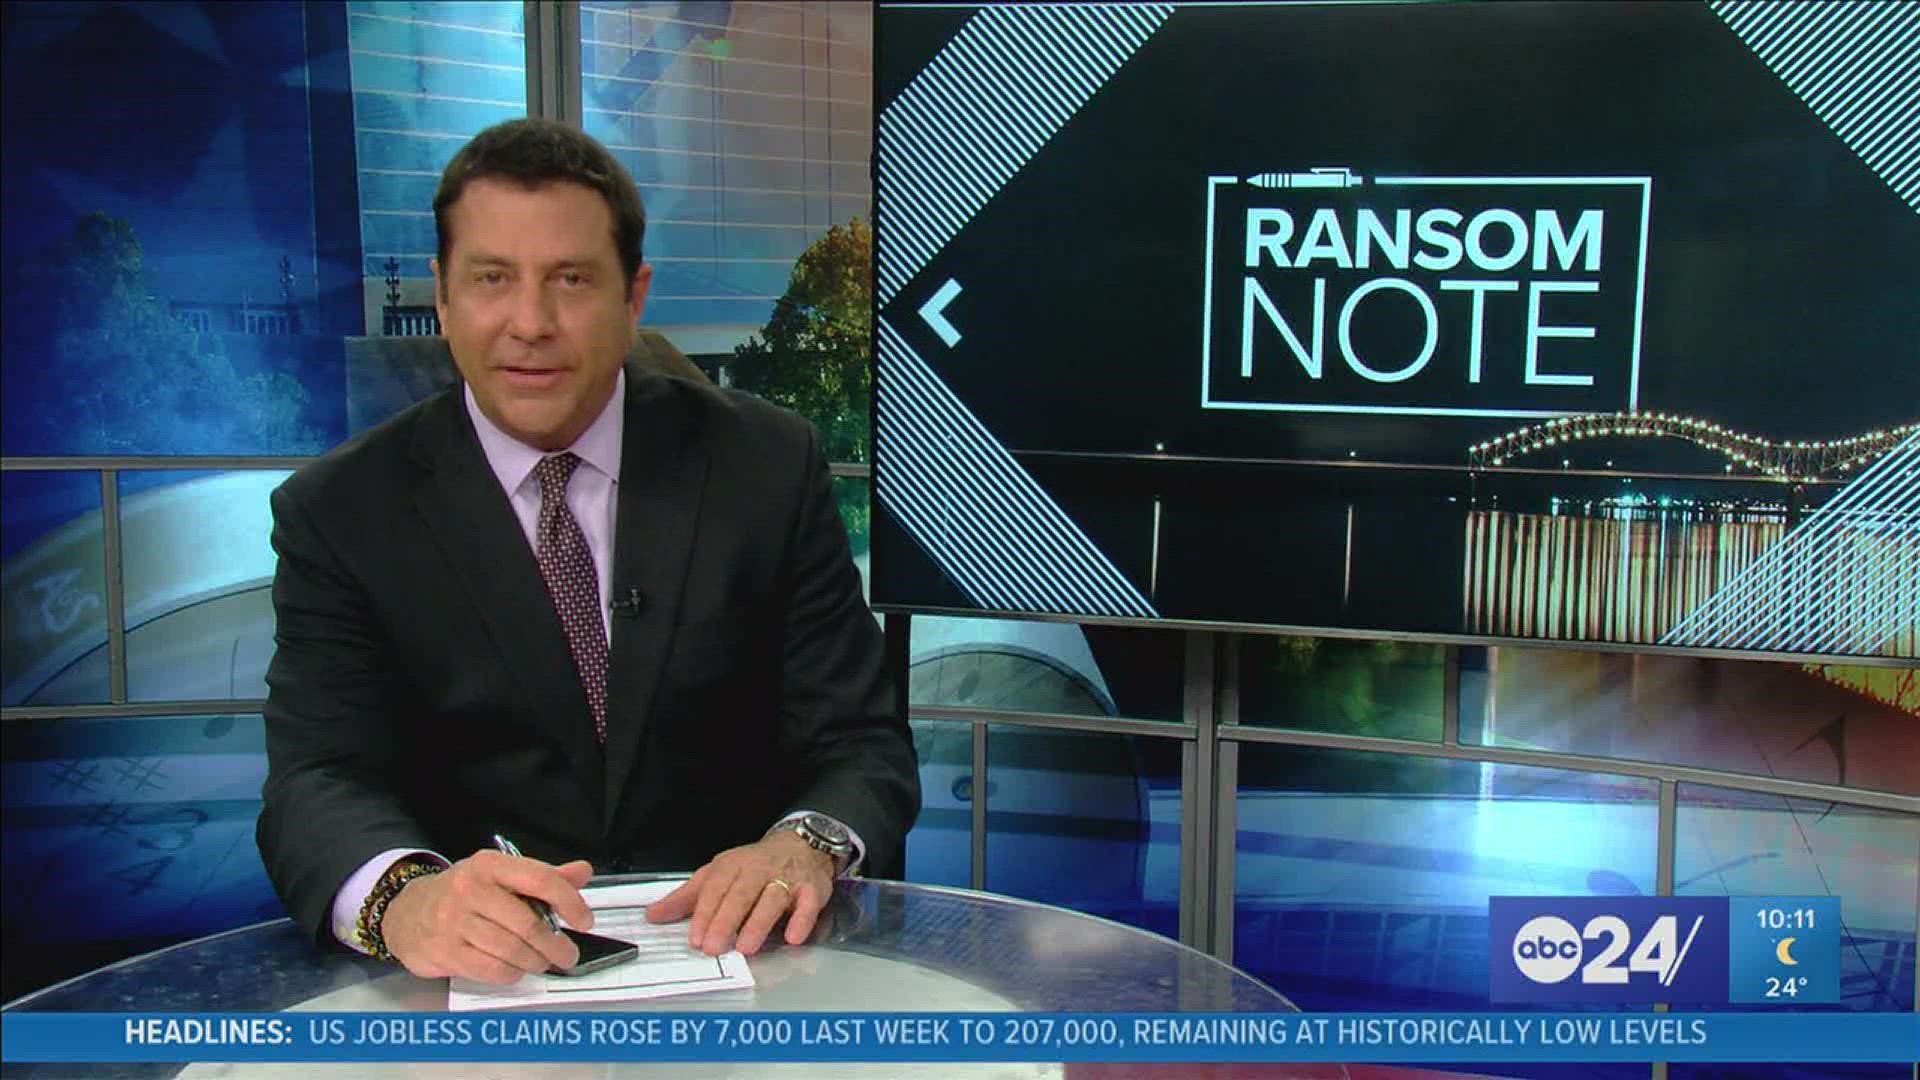 ABC24 Anchor Richard Ransom shares his thoughts on last year's Capitol riot in Thursday's Ransom Note.